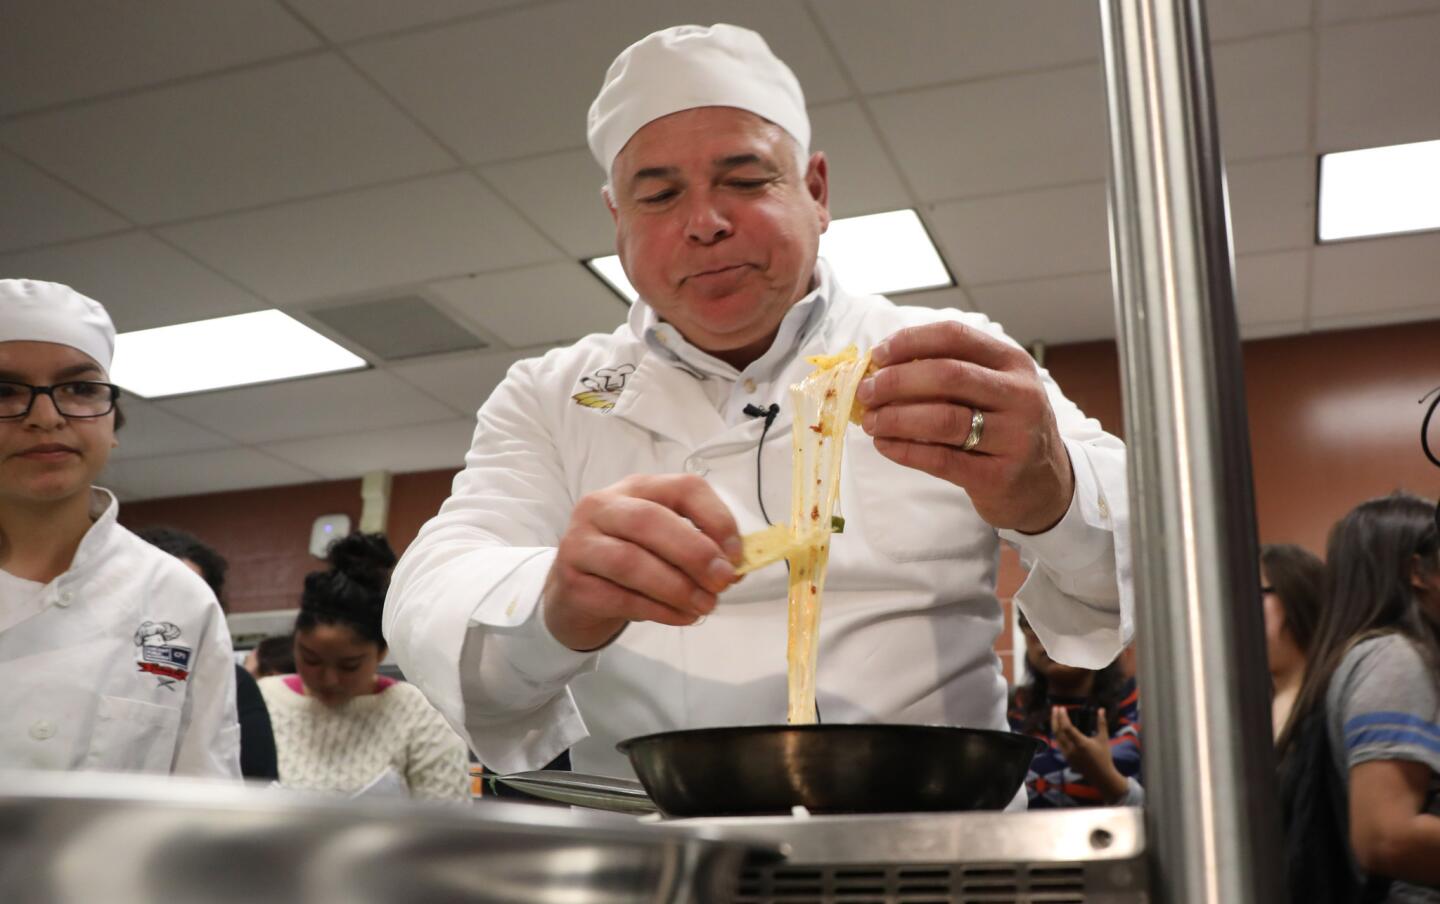 New White Sox manager Rick Renteria met with culinary students at Benito Juarez Community Academy on Jan. 25, 2017. He spoke of his love for cooking while making some queso fundido.